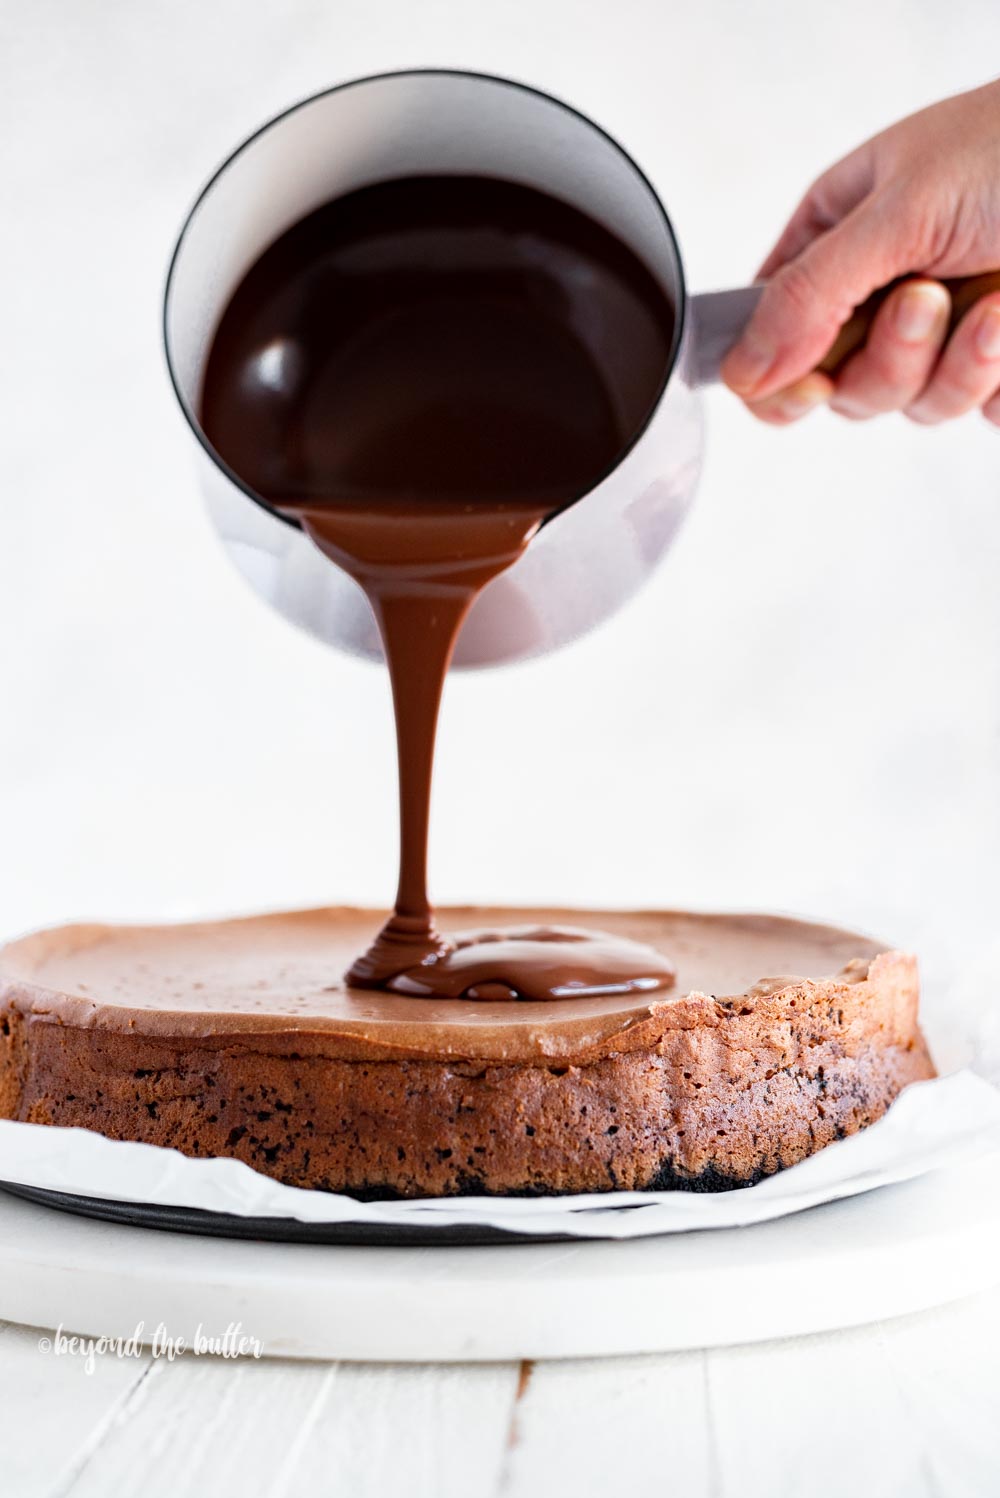 Pouring dark chocolate ganache over top of Triple Chocolate Mocha Cheesecake | All Images © Beyond the Butter, LLC